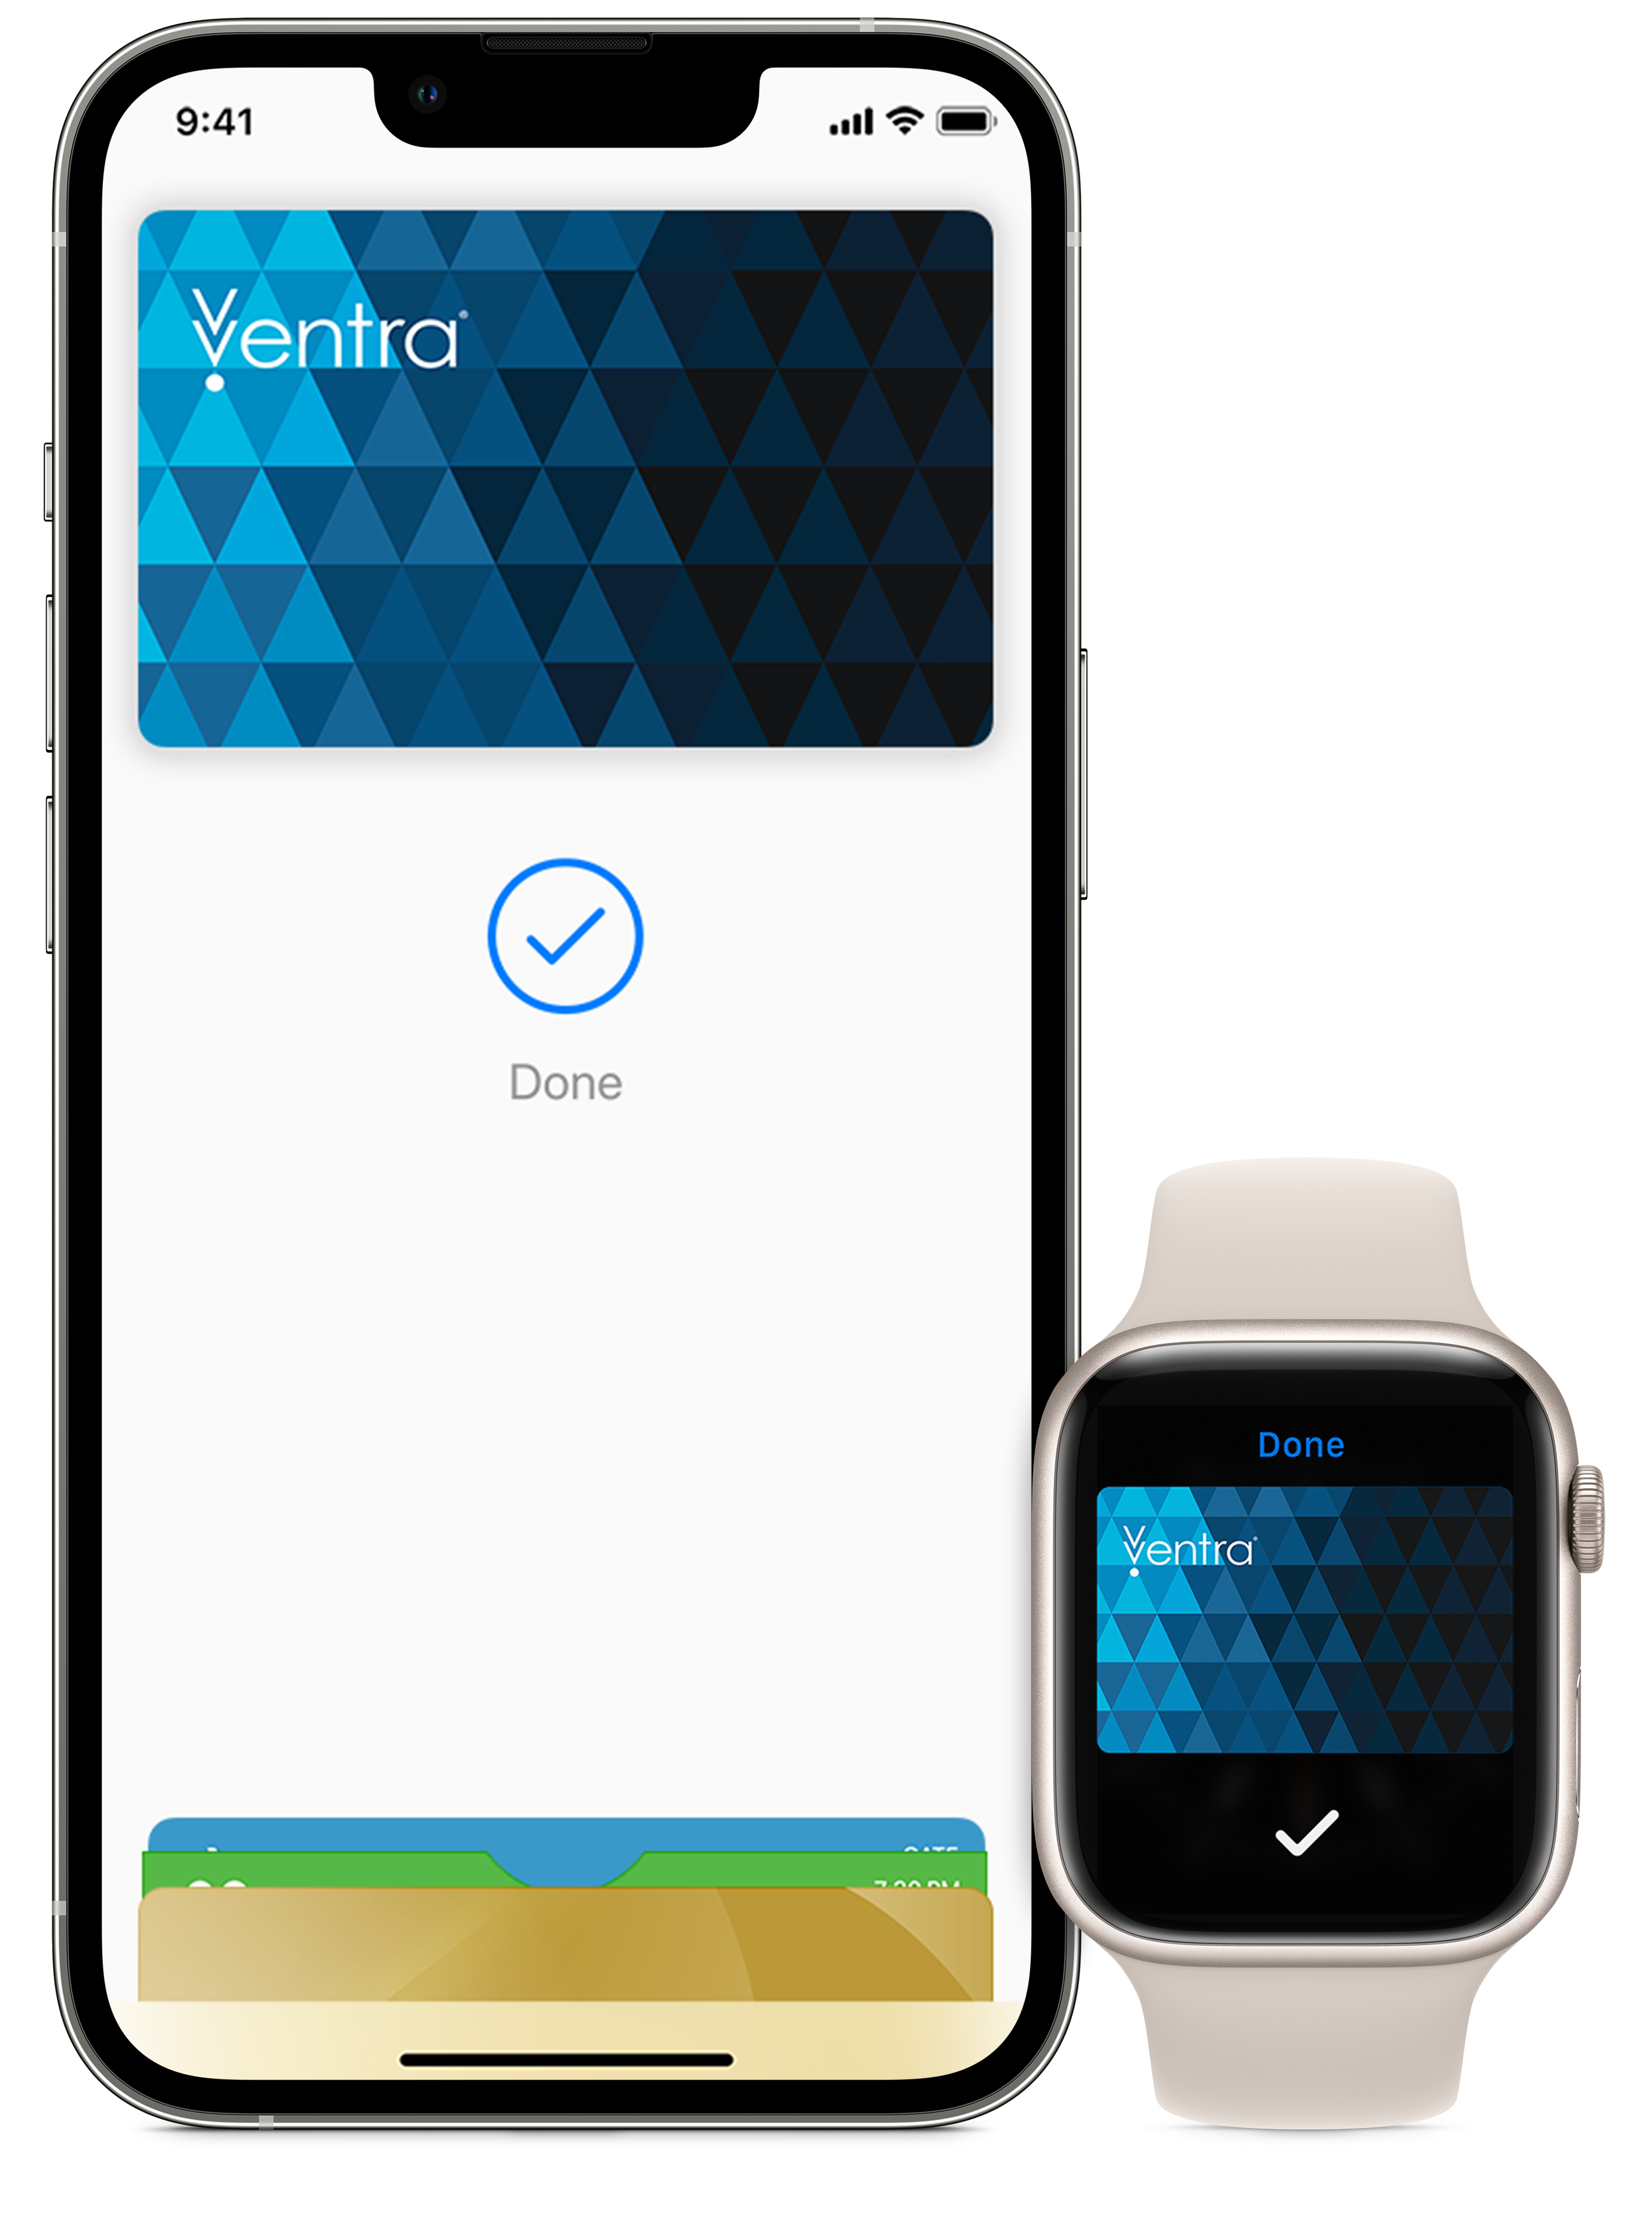 iPhone and Apple Watch displaying Ventra logos